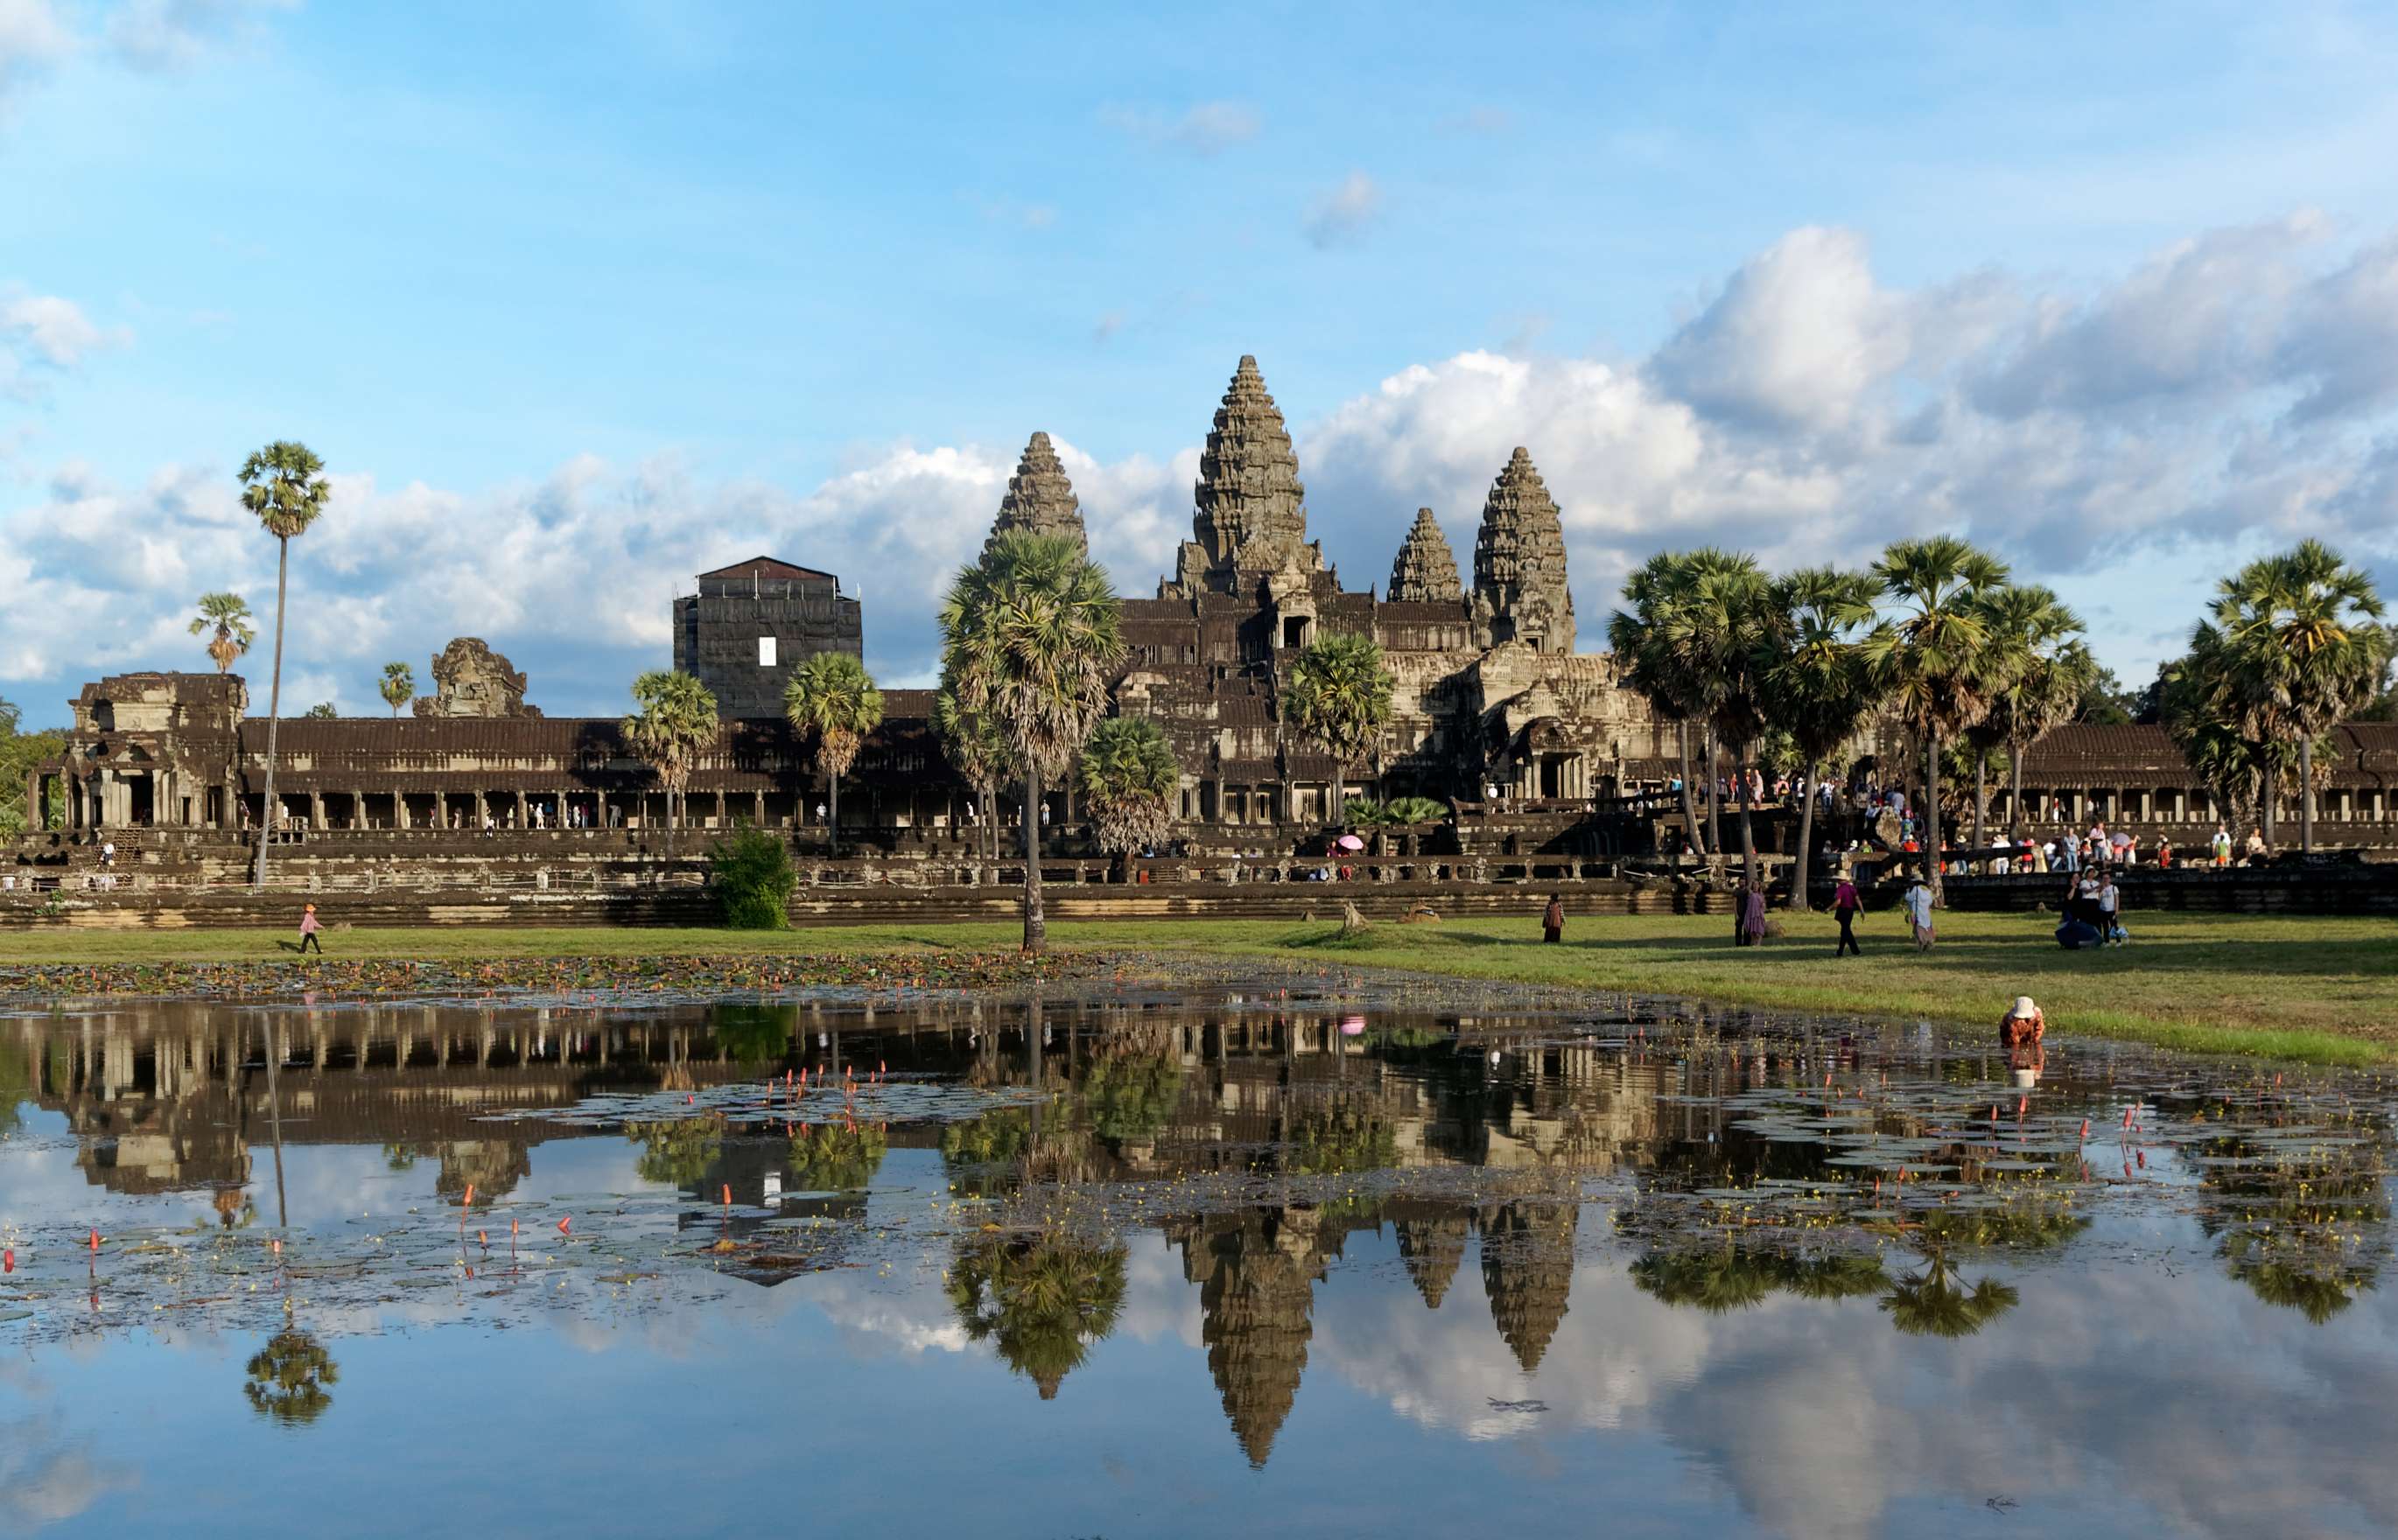 A large, ancient Cambodian temple ruin with long, single storey stone arcades arranged around high conical stone towers sits under a pale blue sky with a sting of clouds in the distance and palm trees in the foreground. The whole scene is reflected in a serene pool of water.